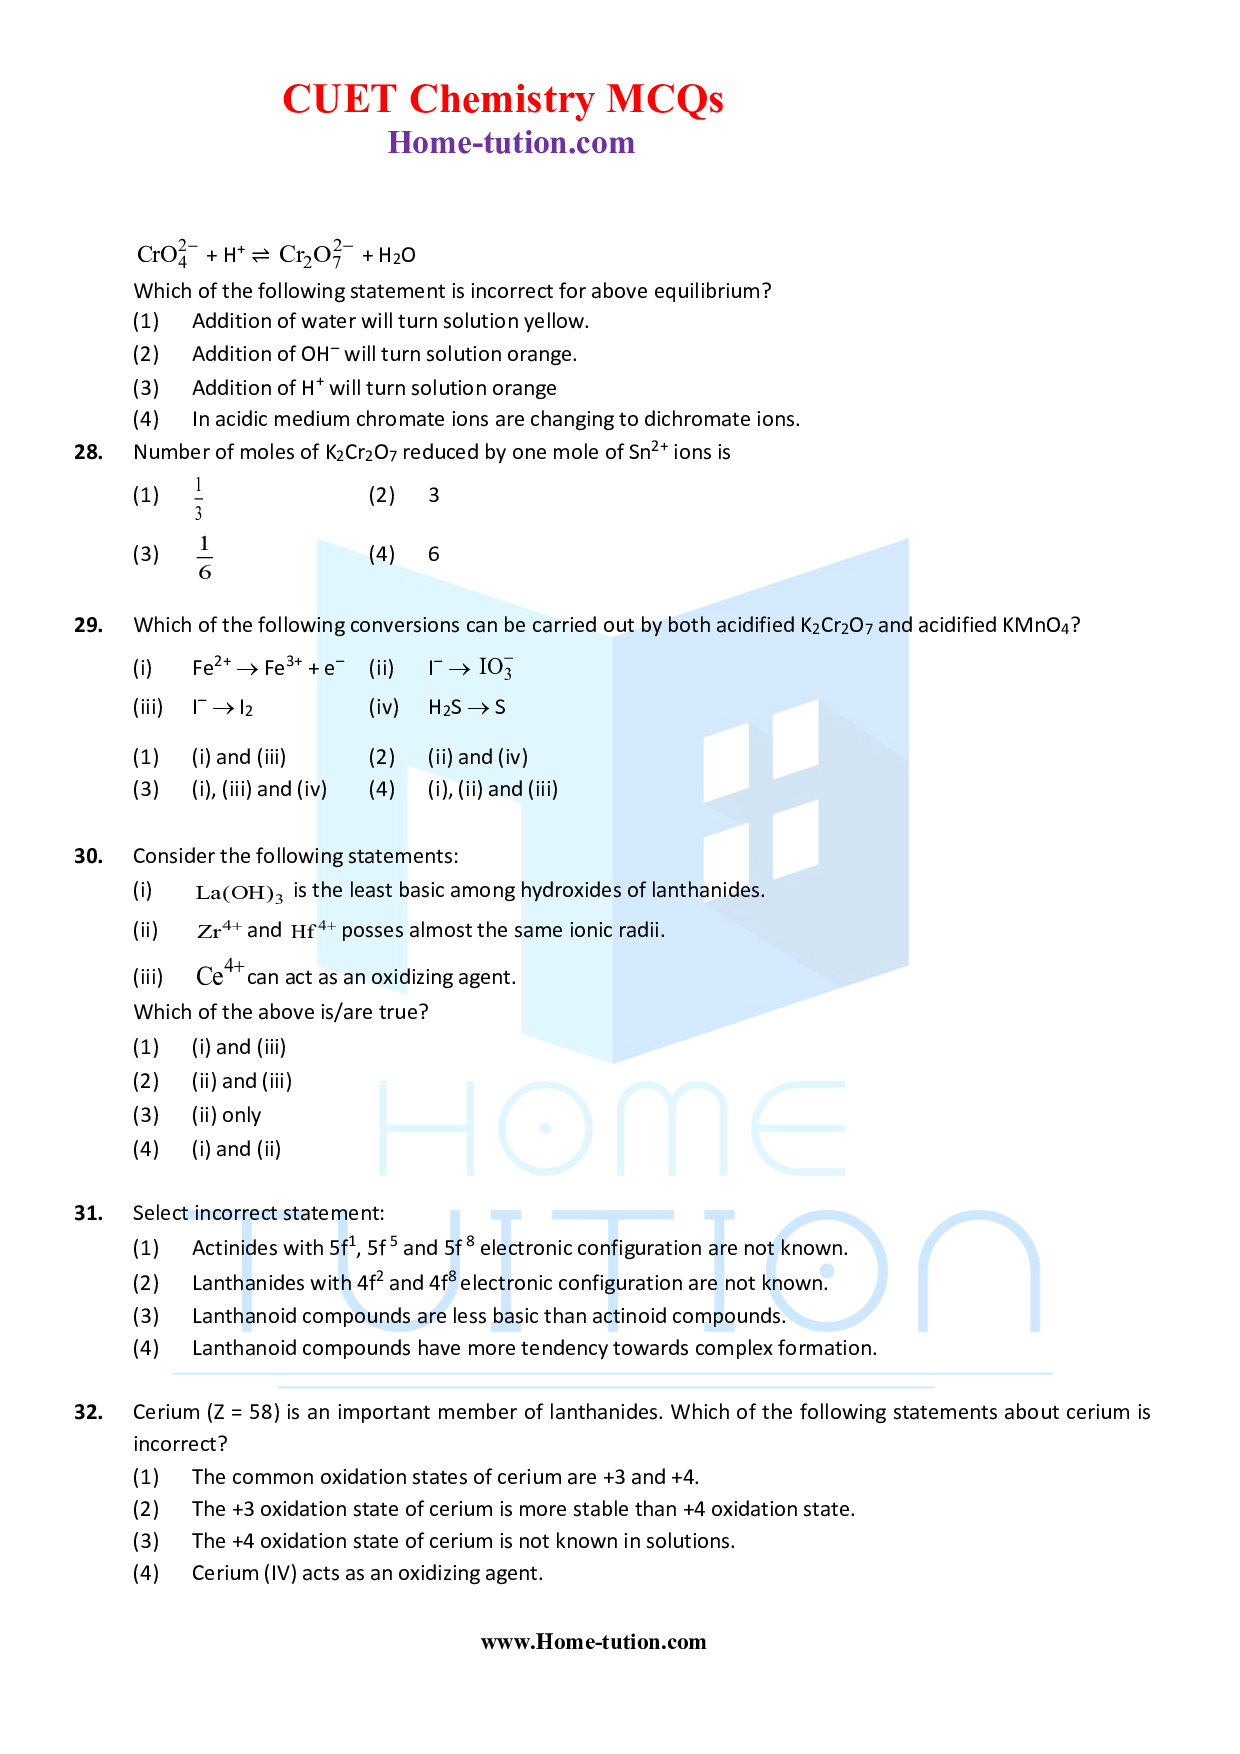 CUET MCQ Questions For Chapter-08 d & f Block Elements